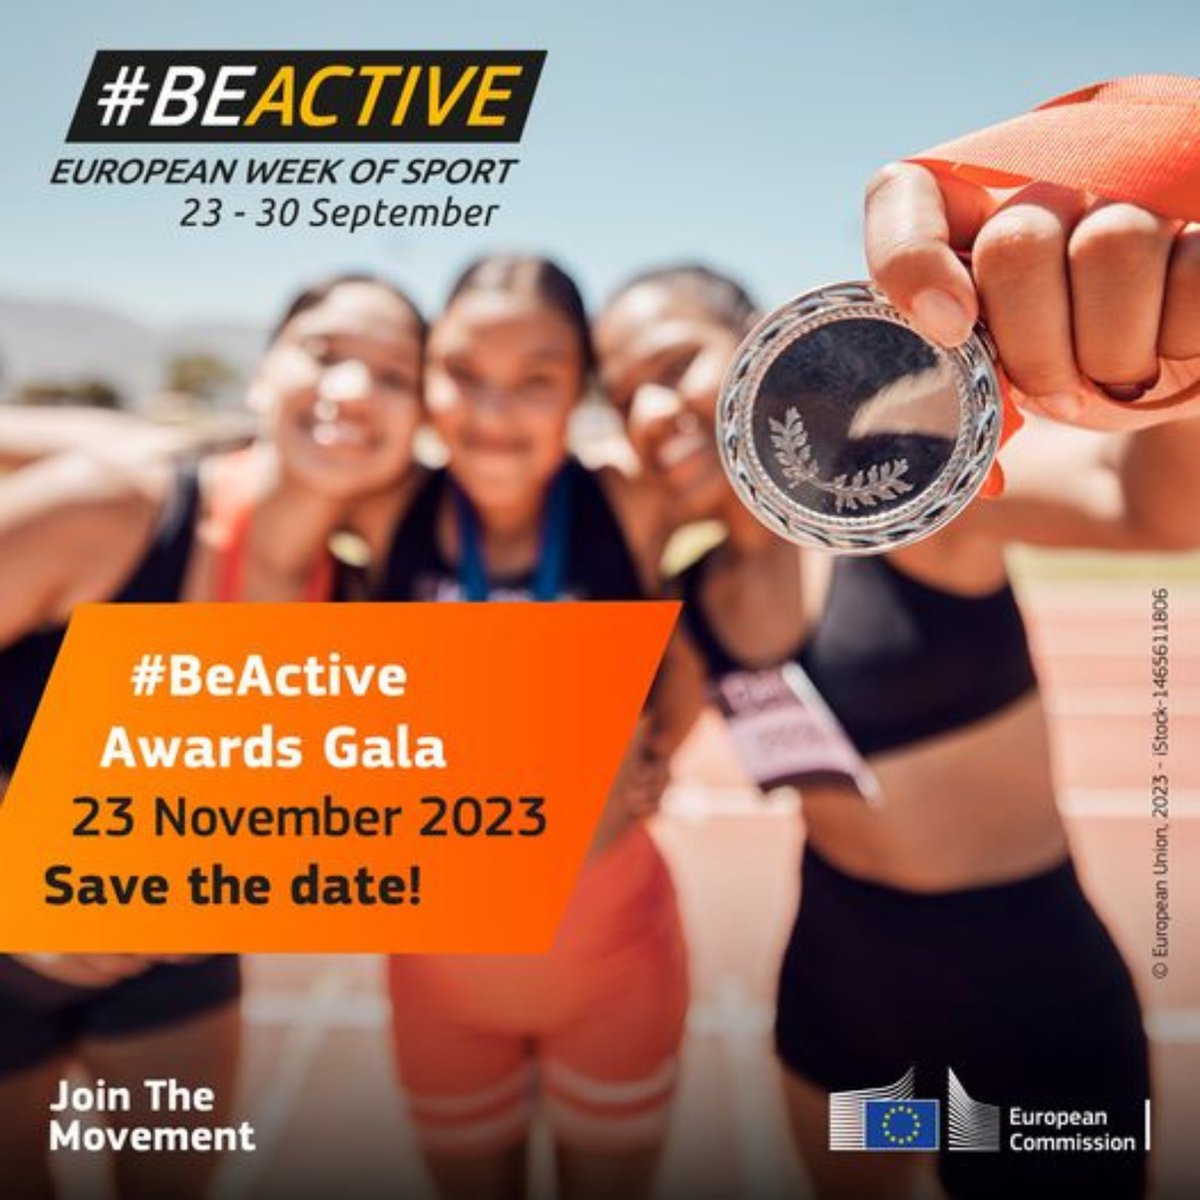 Super excited to be heading to Brussels for the @EuSport @EU_Commission #BeActive Awards! This is a massive recognition of the transformative impact #MixedAbility has on so many communities across Europe and beyond, radically rethinking the way we think of inclusion and sport! 🤞